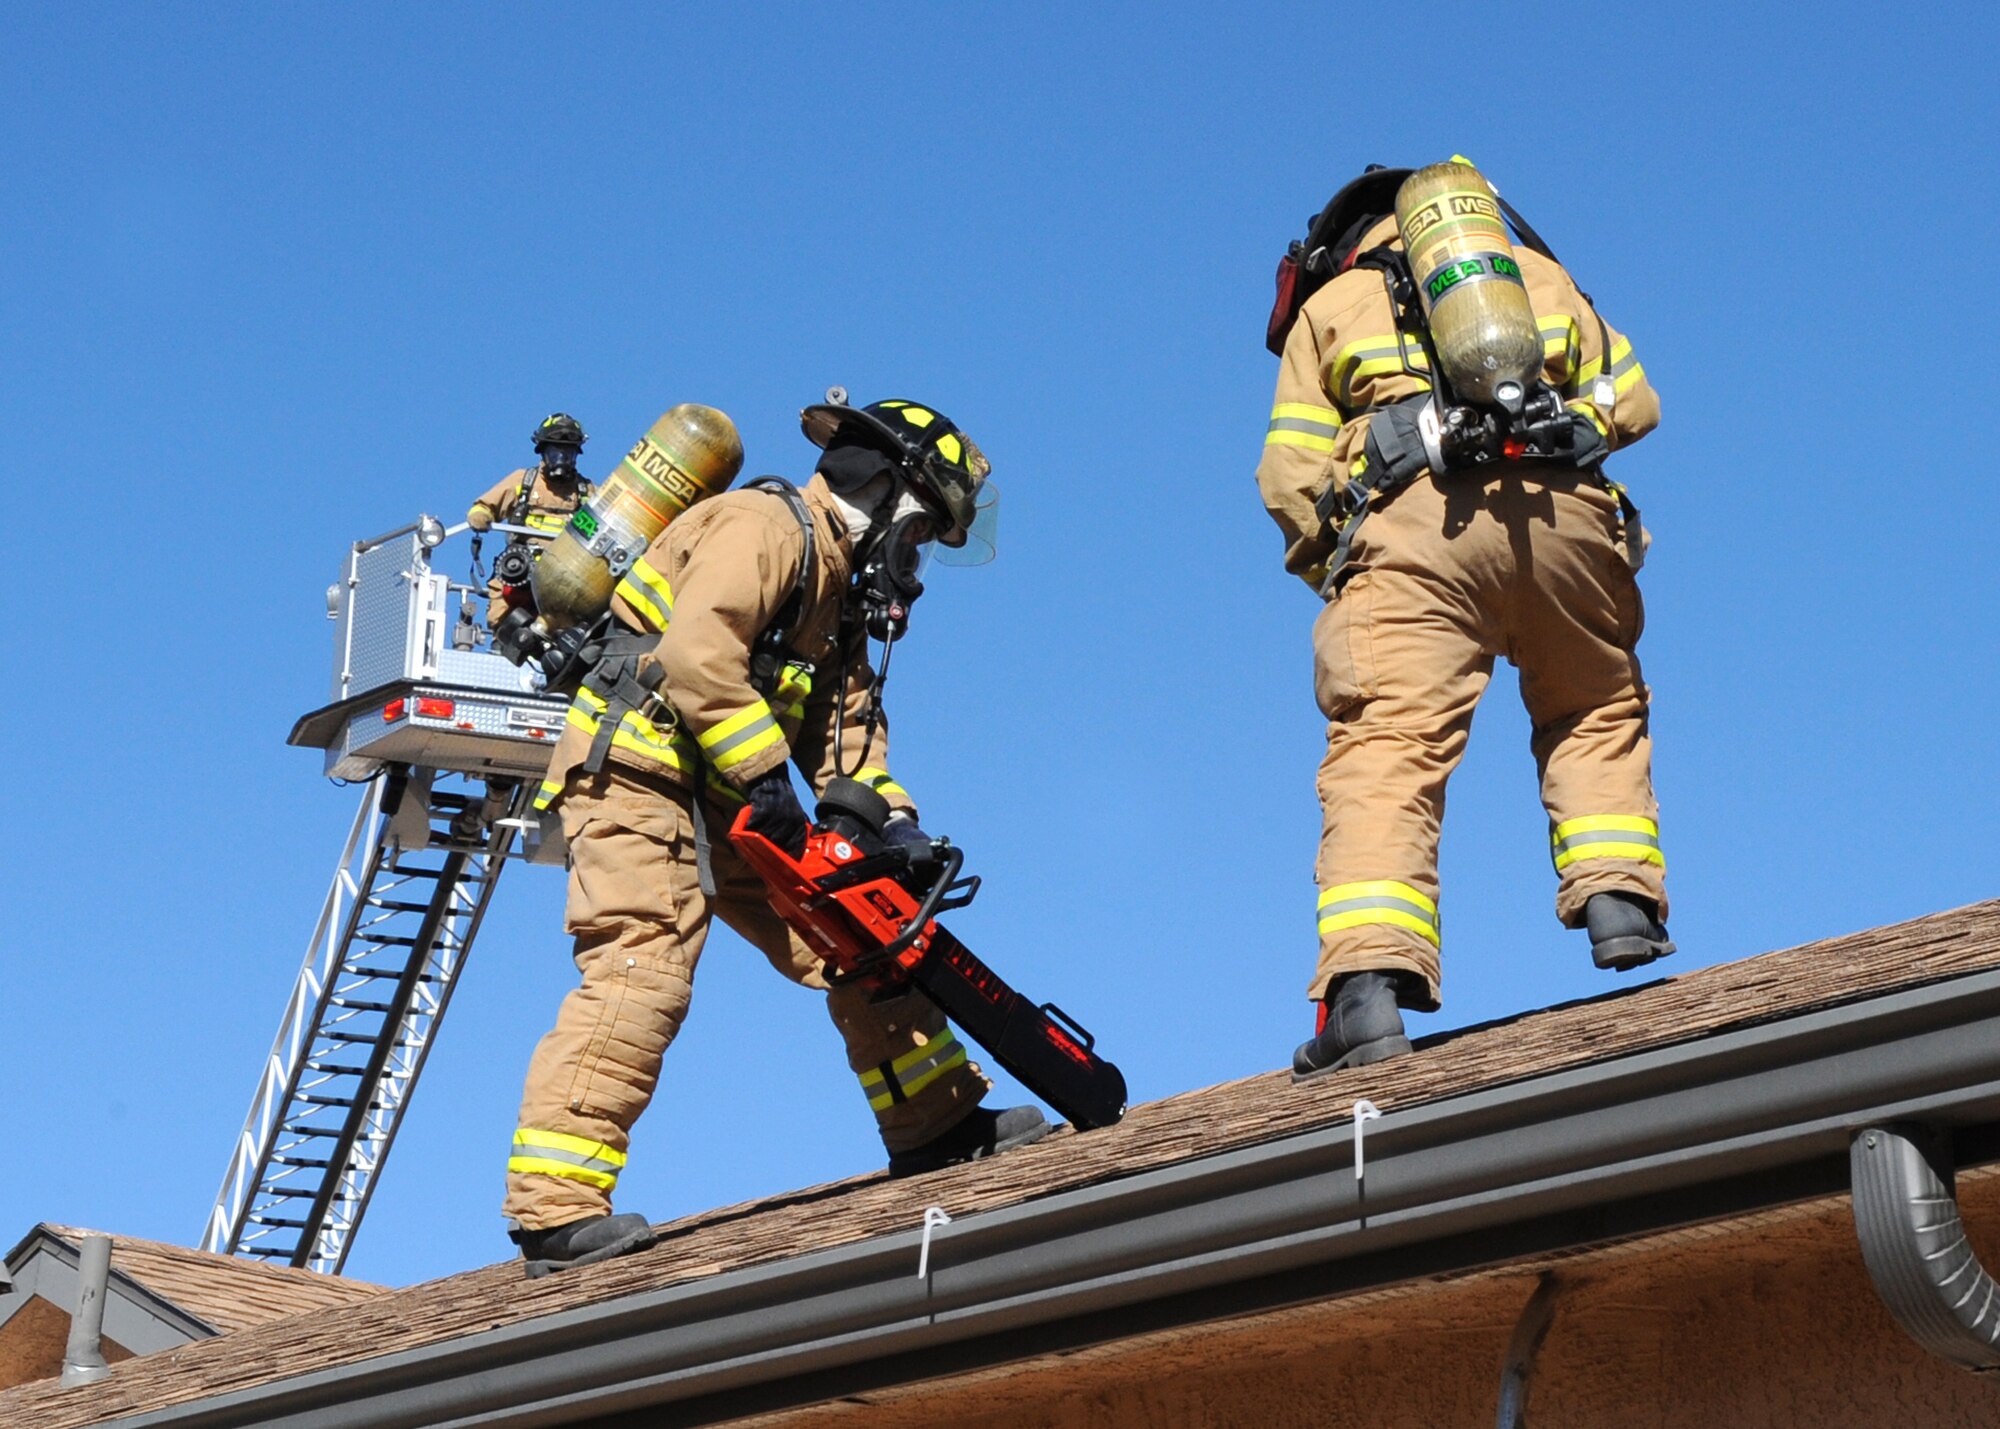 Firemen simulate cutting into the roof of a house to vent fire and smoke.  U.S. Air Force Photo by Dennis Carlson.